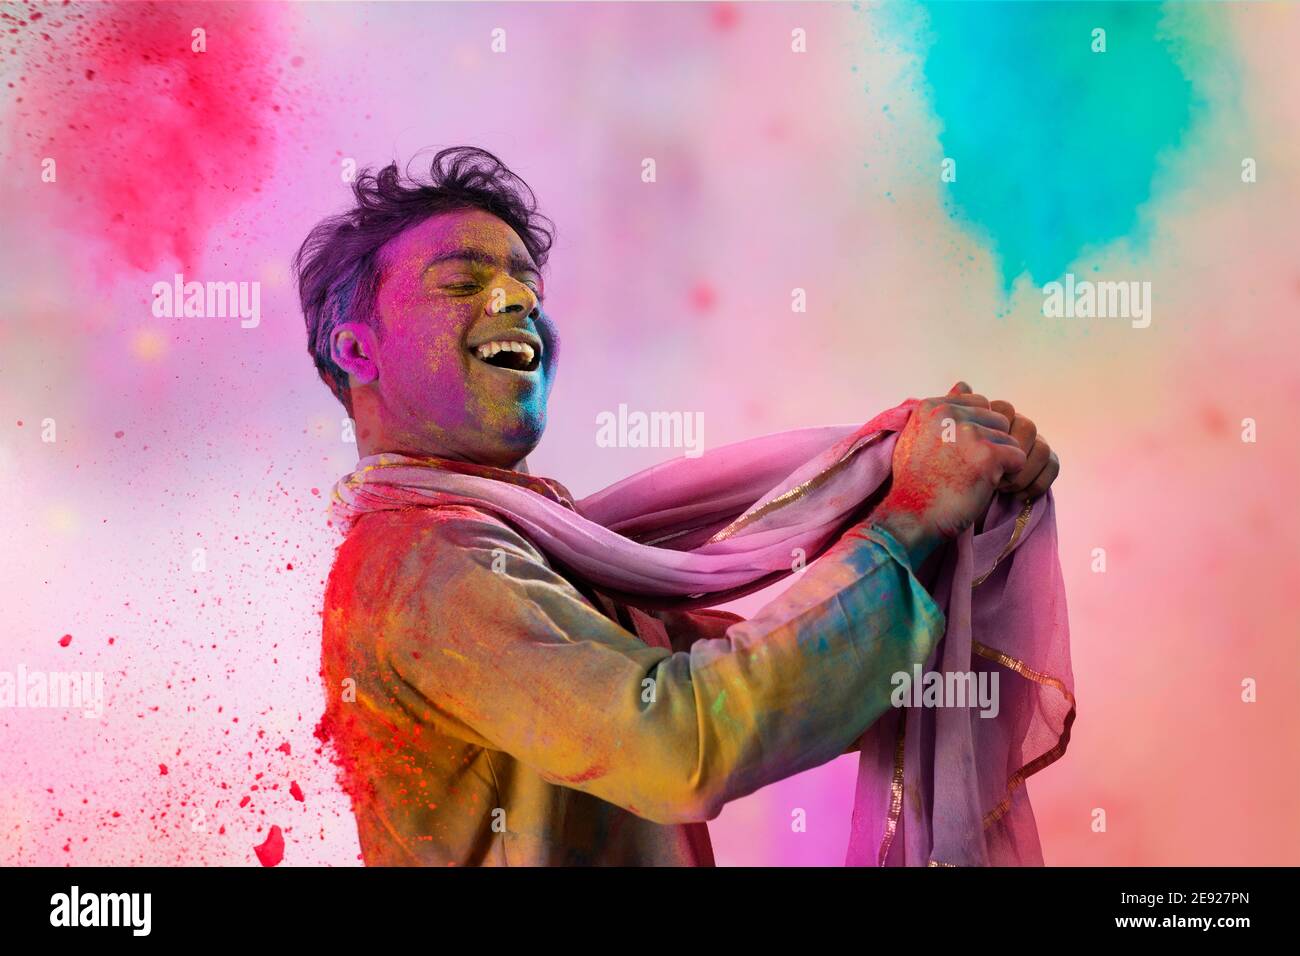 Man with gulal on his face dancing holding a dupatta in his hand during Holi celebration Stock Photo